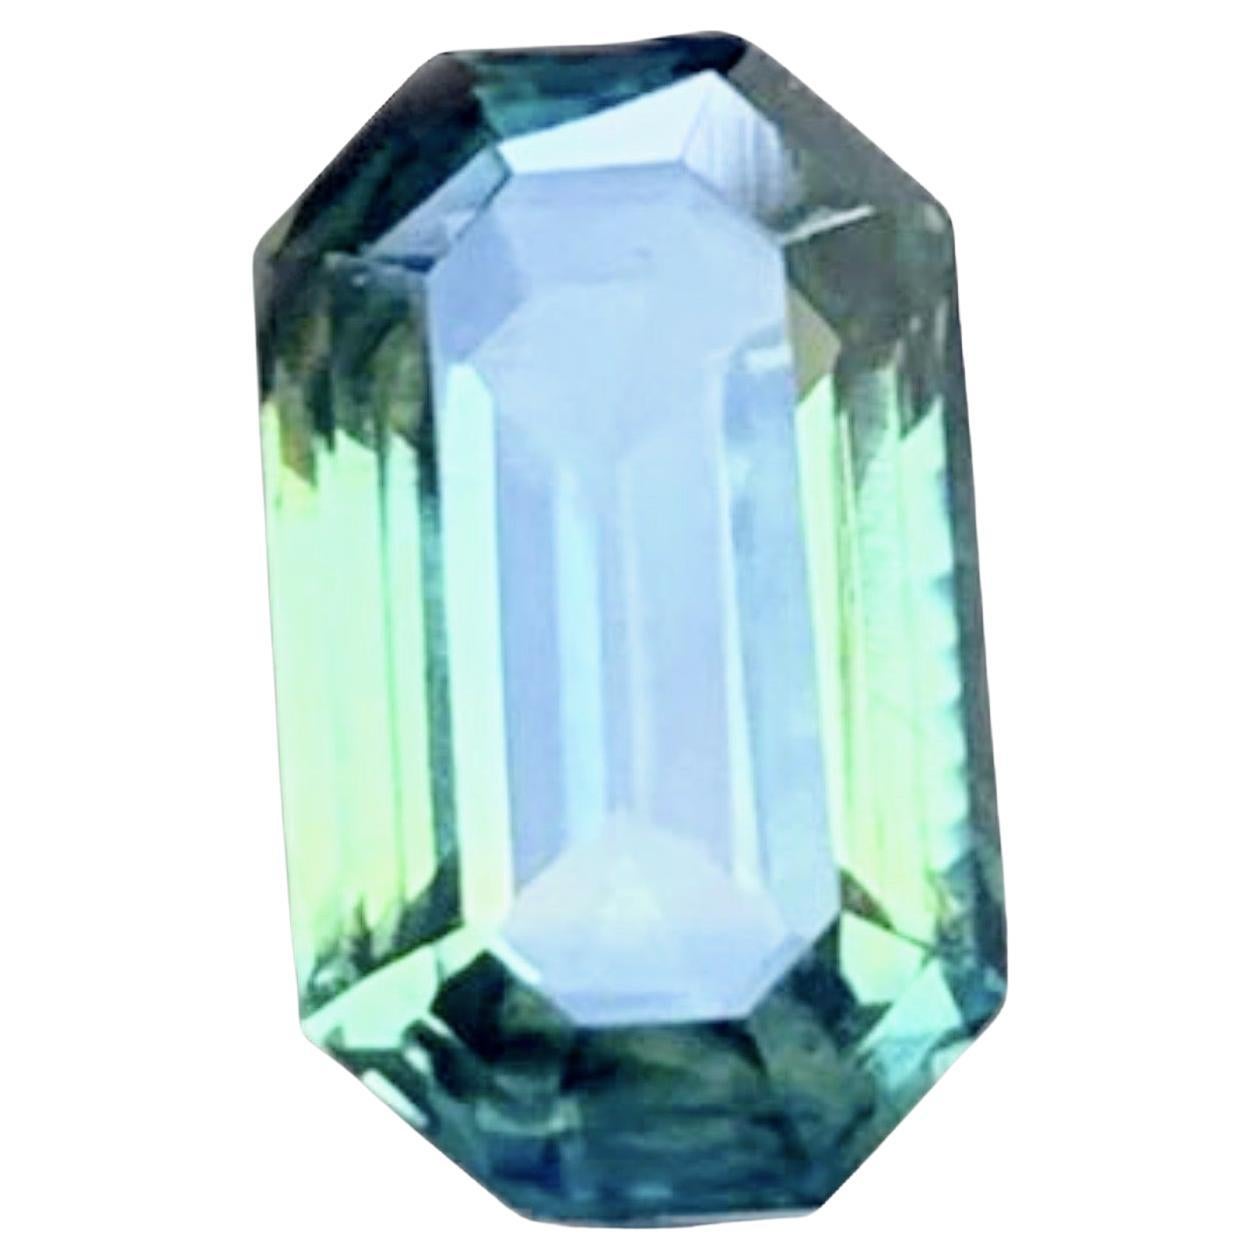 Artisan 1.8ct Emerald Cut LOUPE CLEAN Natural Teal Blue Sapphire Gemstone For Sale